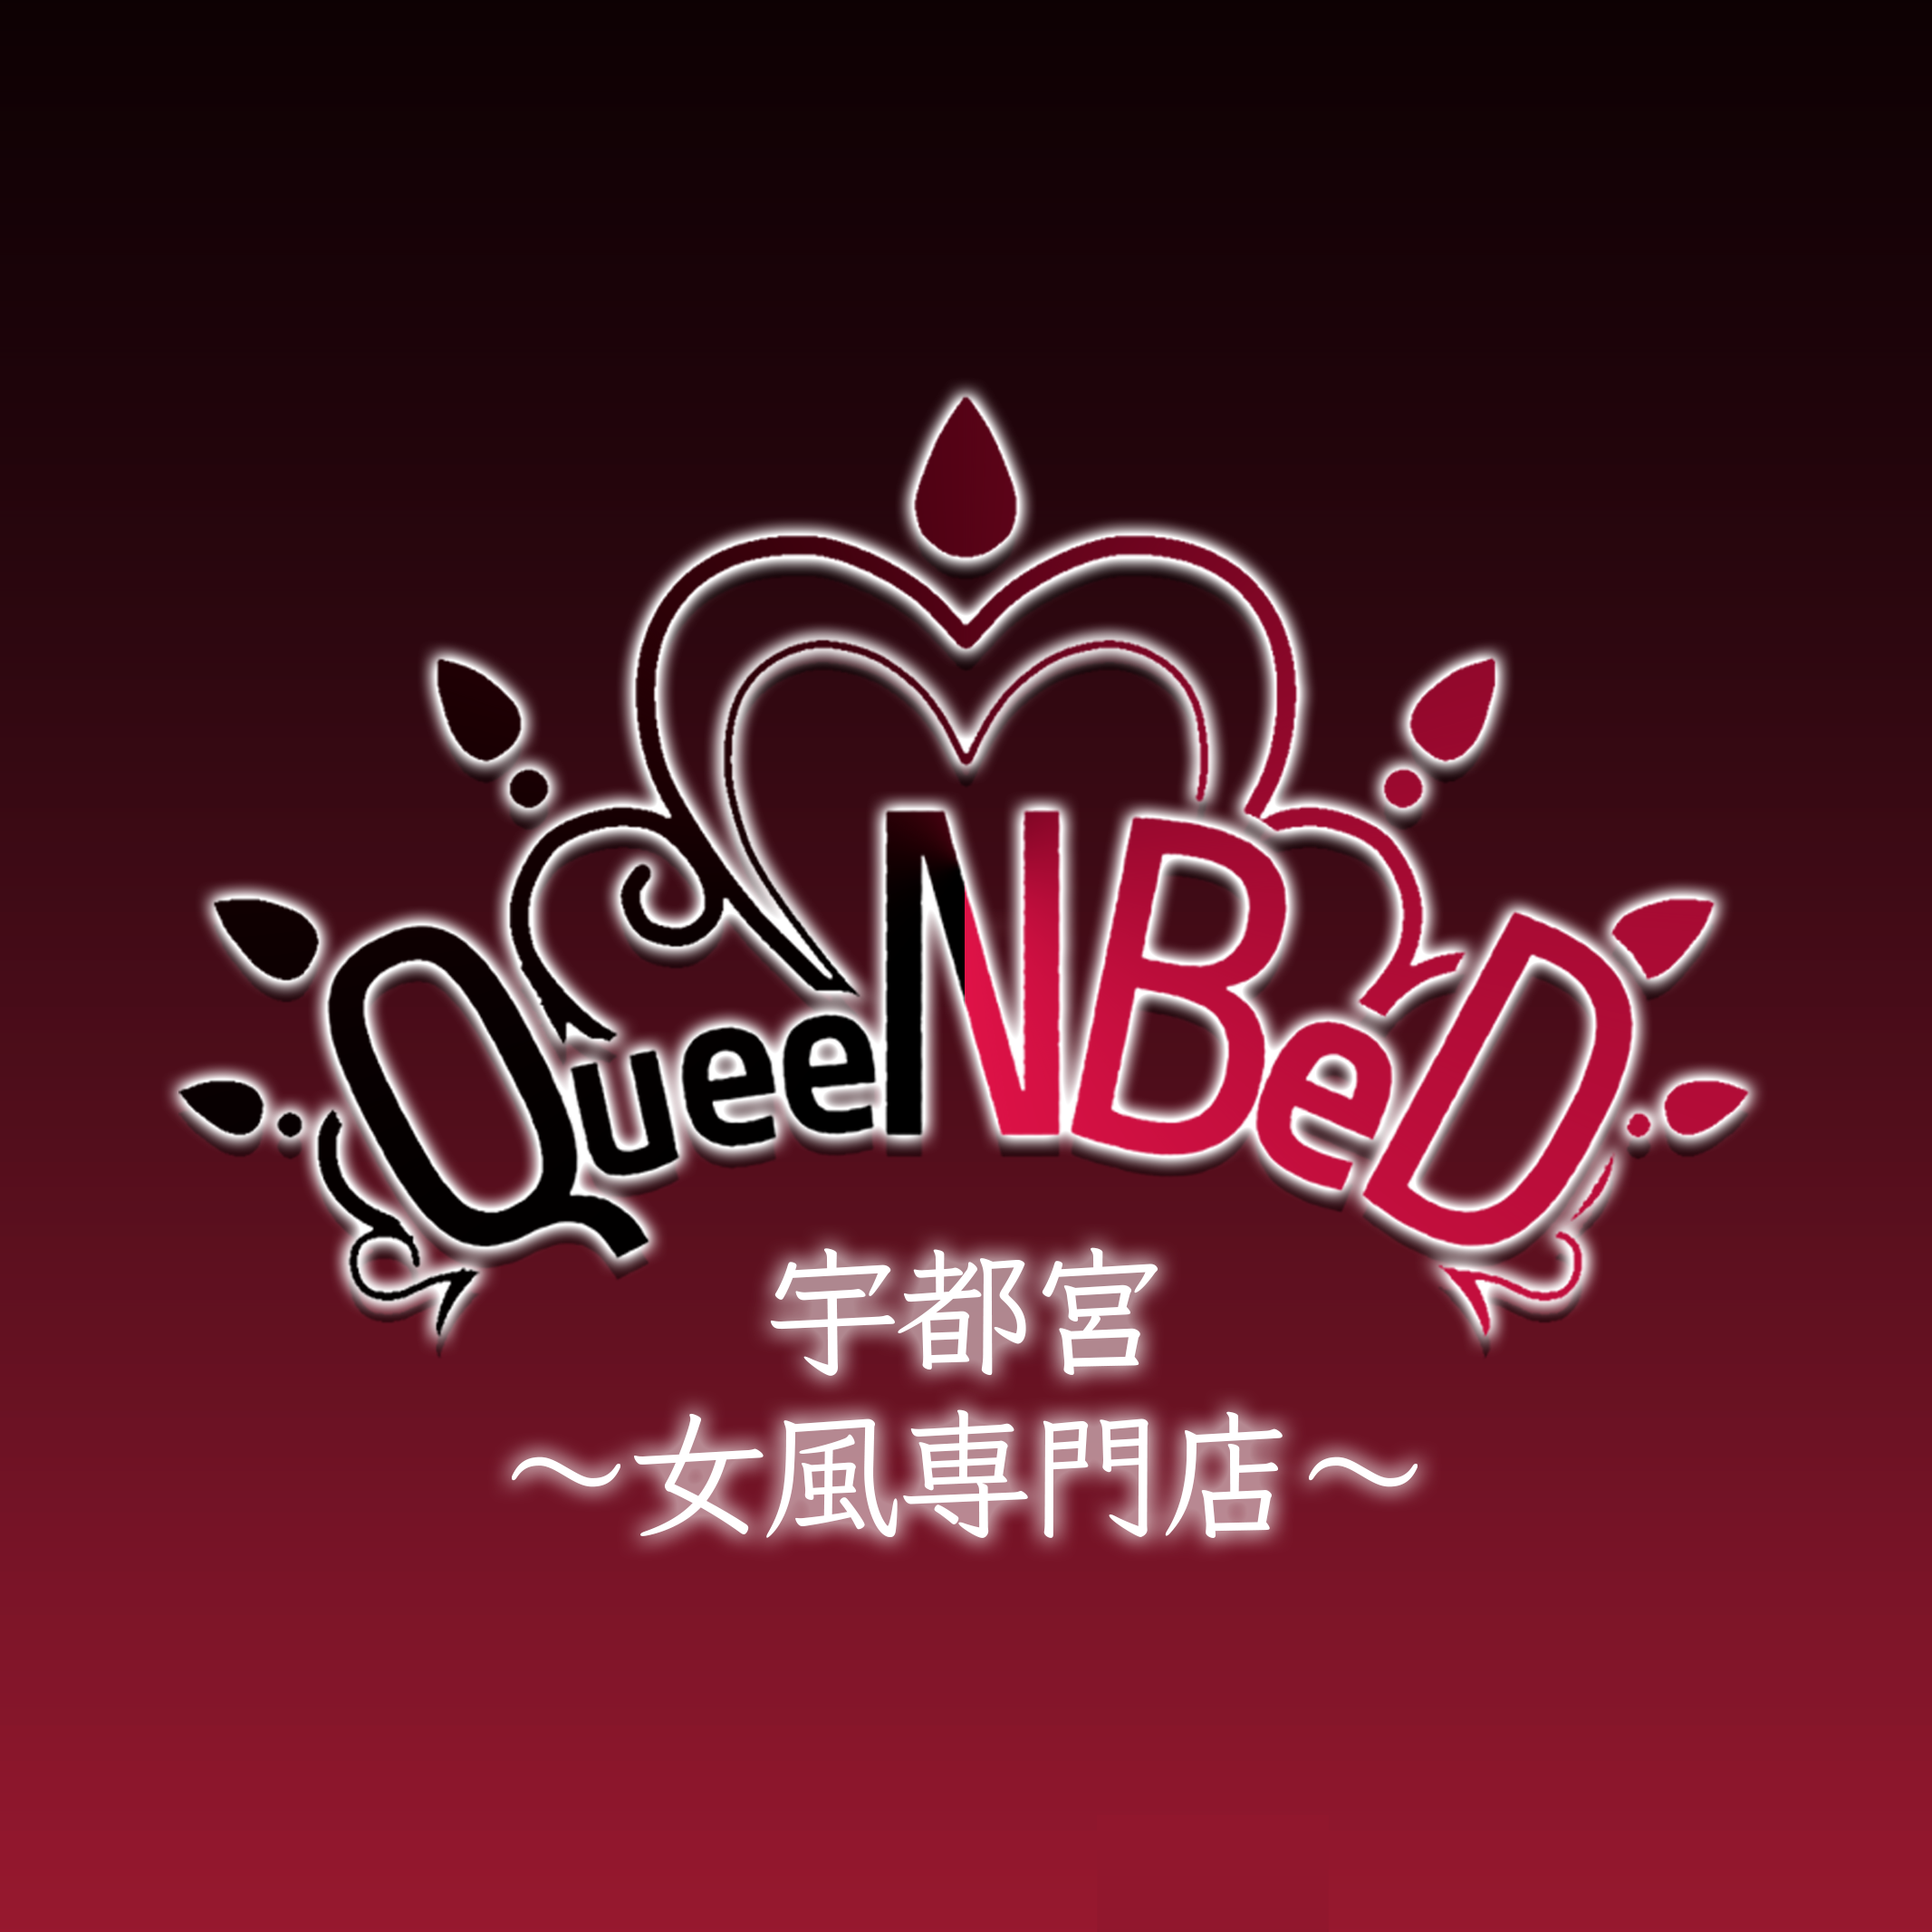 QueeNBeD宇都宮のロゴ画像